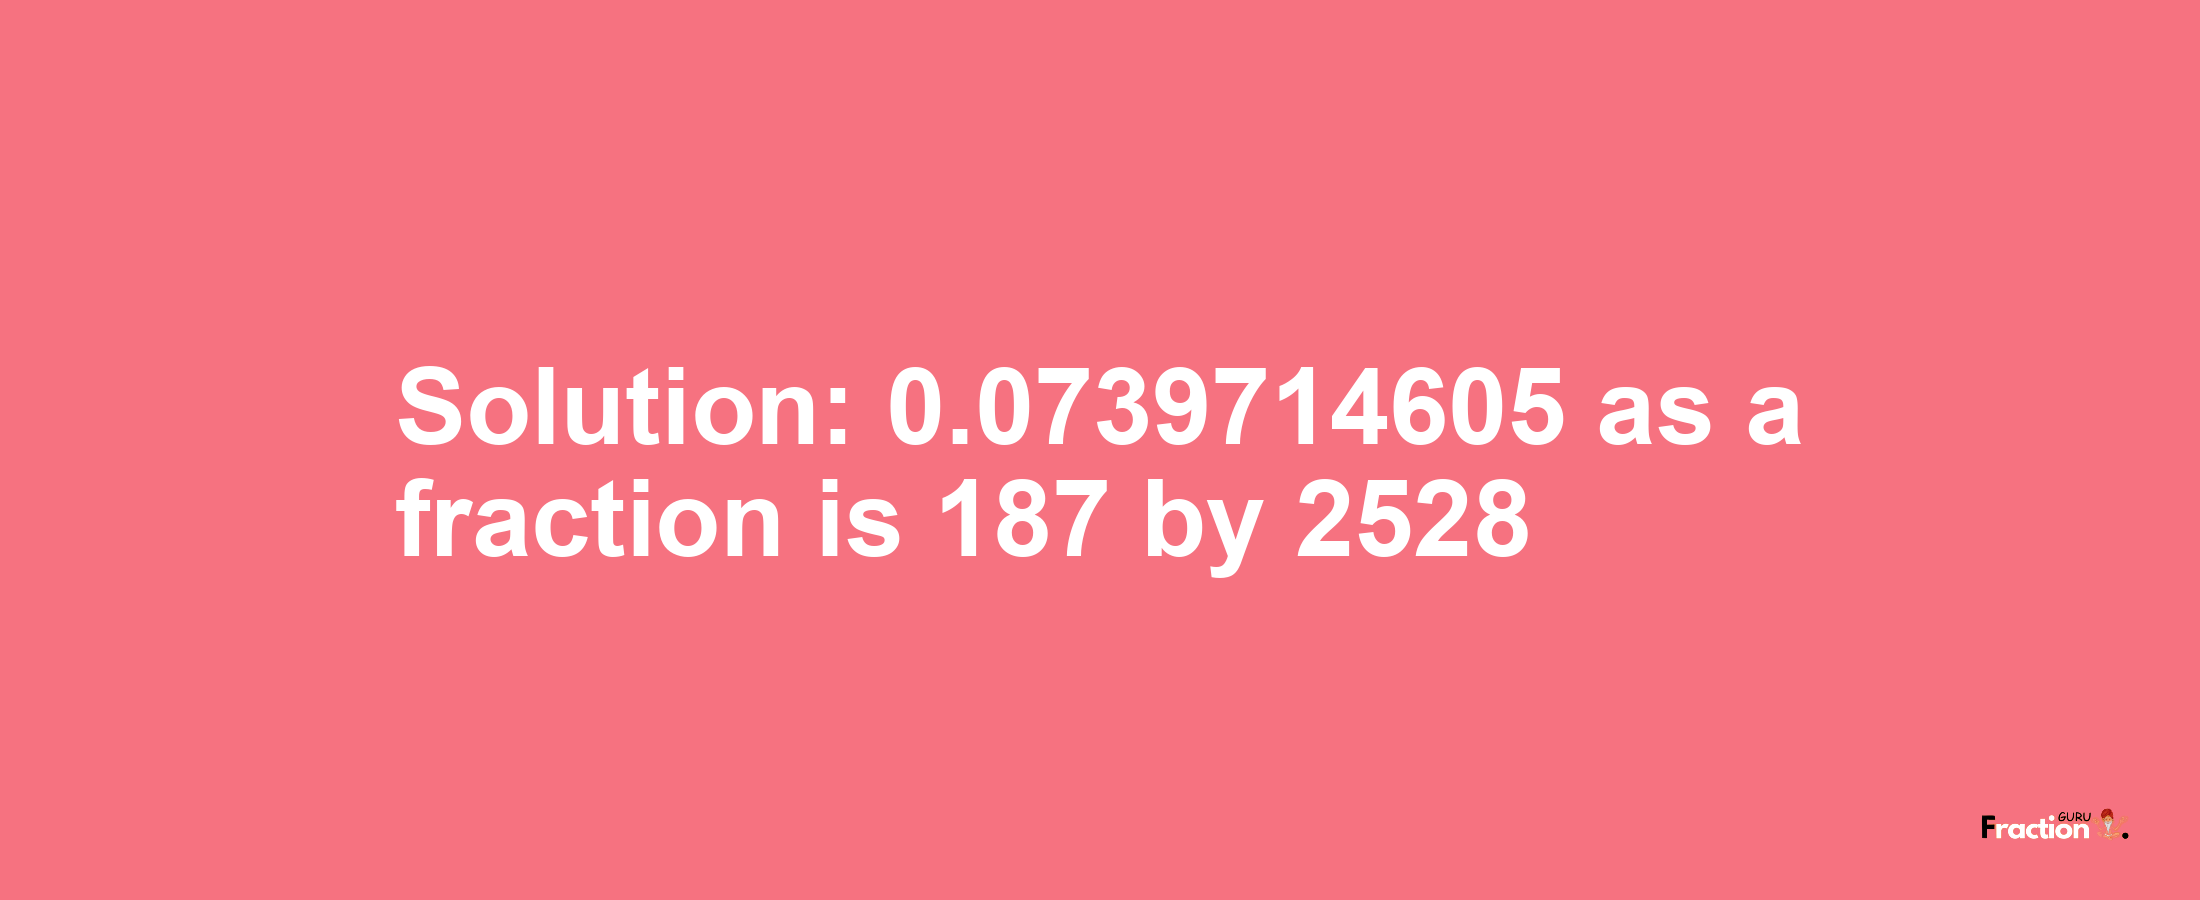 Solution:0.0739714605 as a fraction is 187/2528